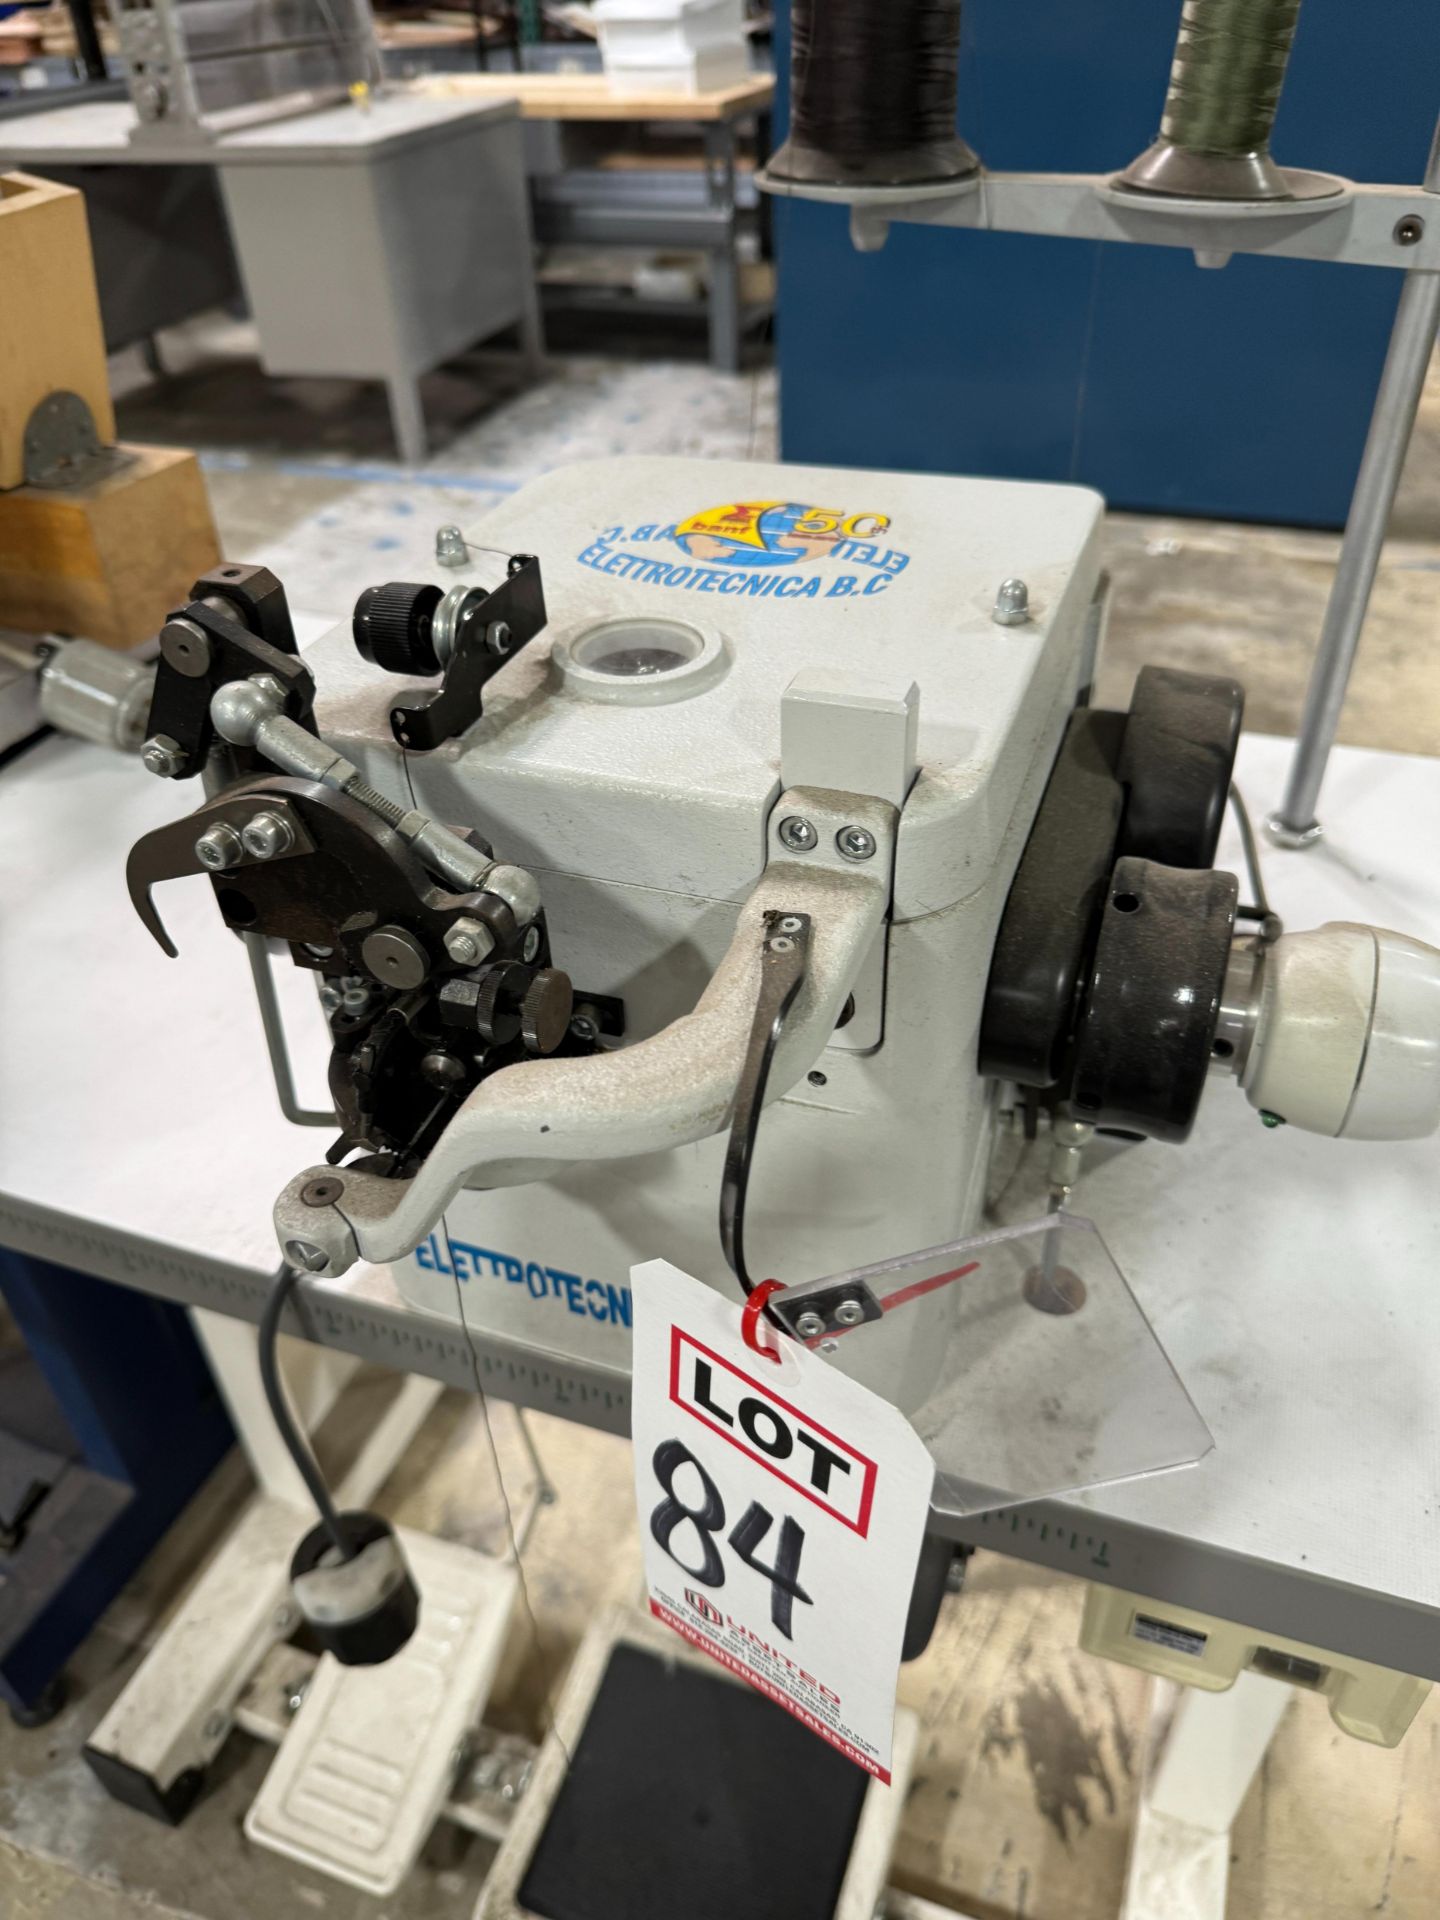 2019 ELETTROTECNICA B.C. STROBEL MACHINE, MODEL 441-1, S/N 19/0003/1, SPECIALTY SEWING MACHINE FOR - Image 2 of 4